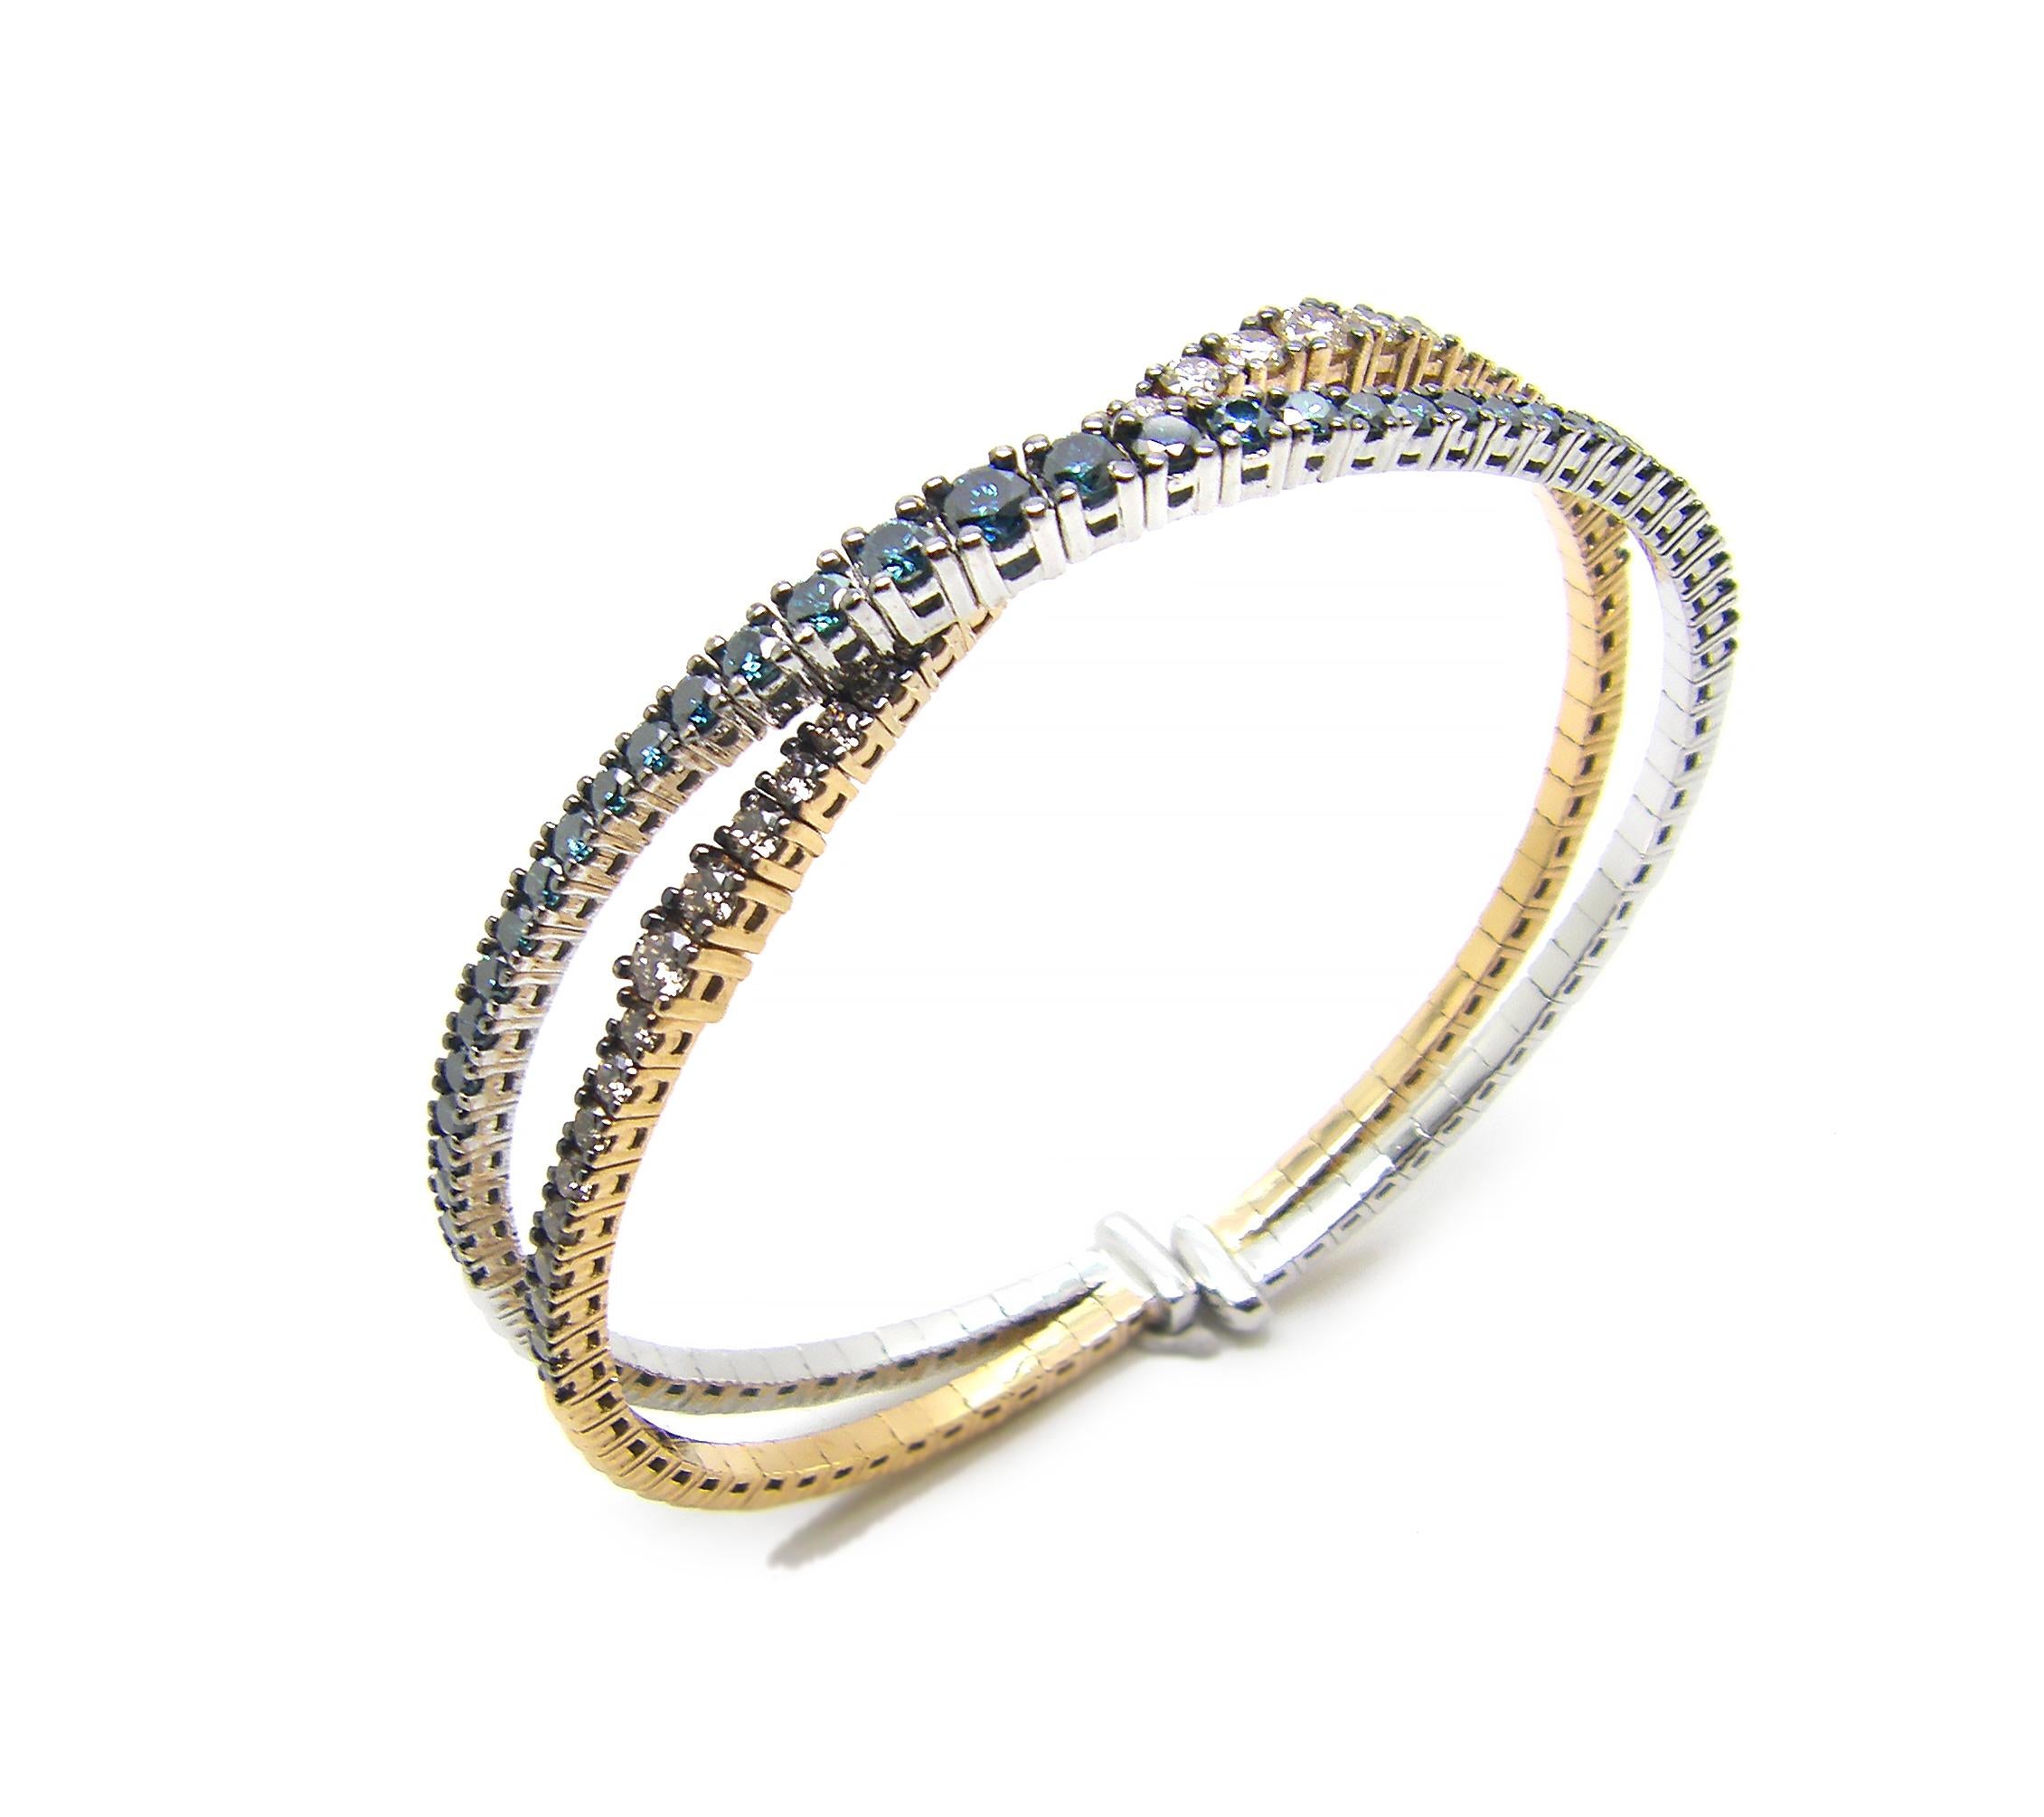 S.Georgios designer two-tone double tennis bangle bracelet in white and rose gold 18 karats with brown and blue diamonds are all microscopically set. This gorgeous bracelet is custom made and has brilliant-cut brown diamonds total weight of 1.88